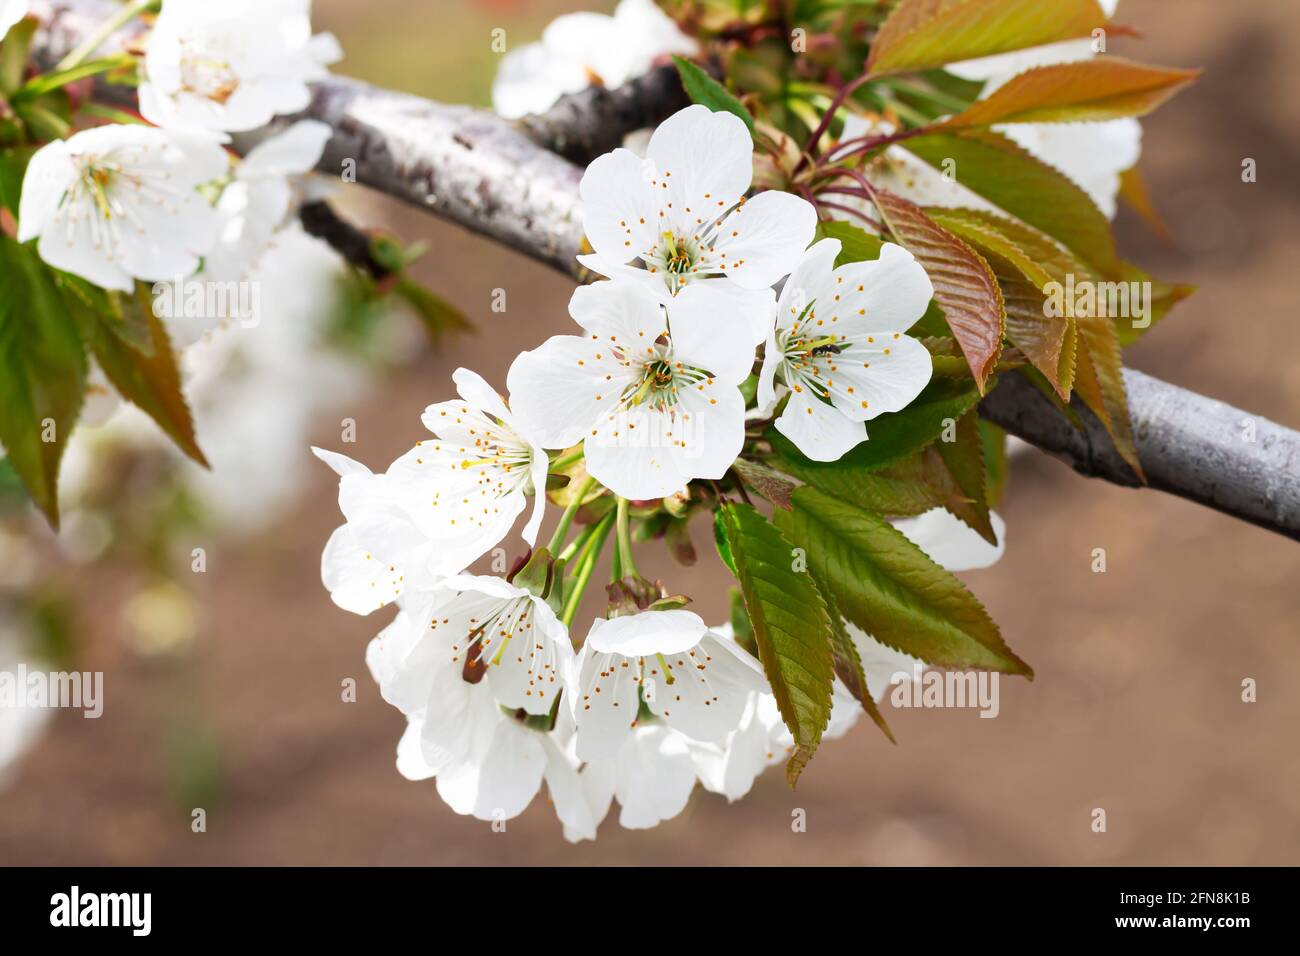 White spring flowers on fruit tree in orchard, cherry blossom close-up Stock Photo